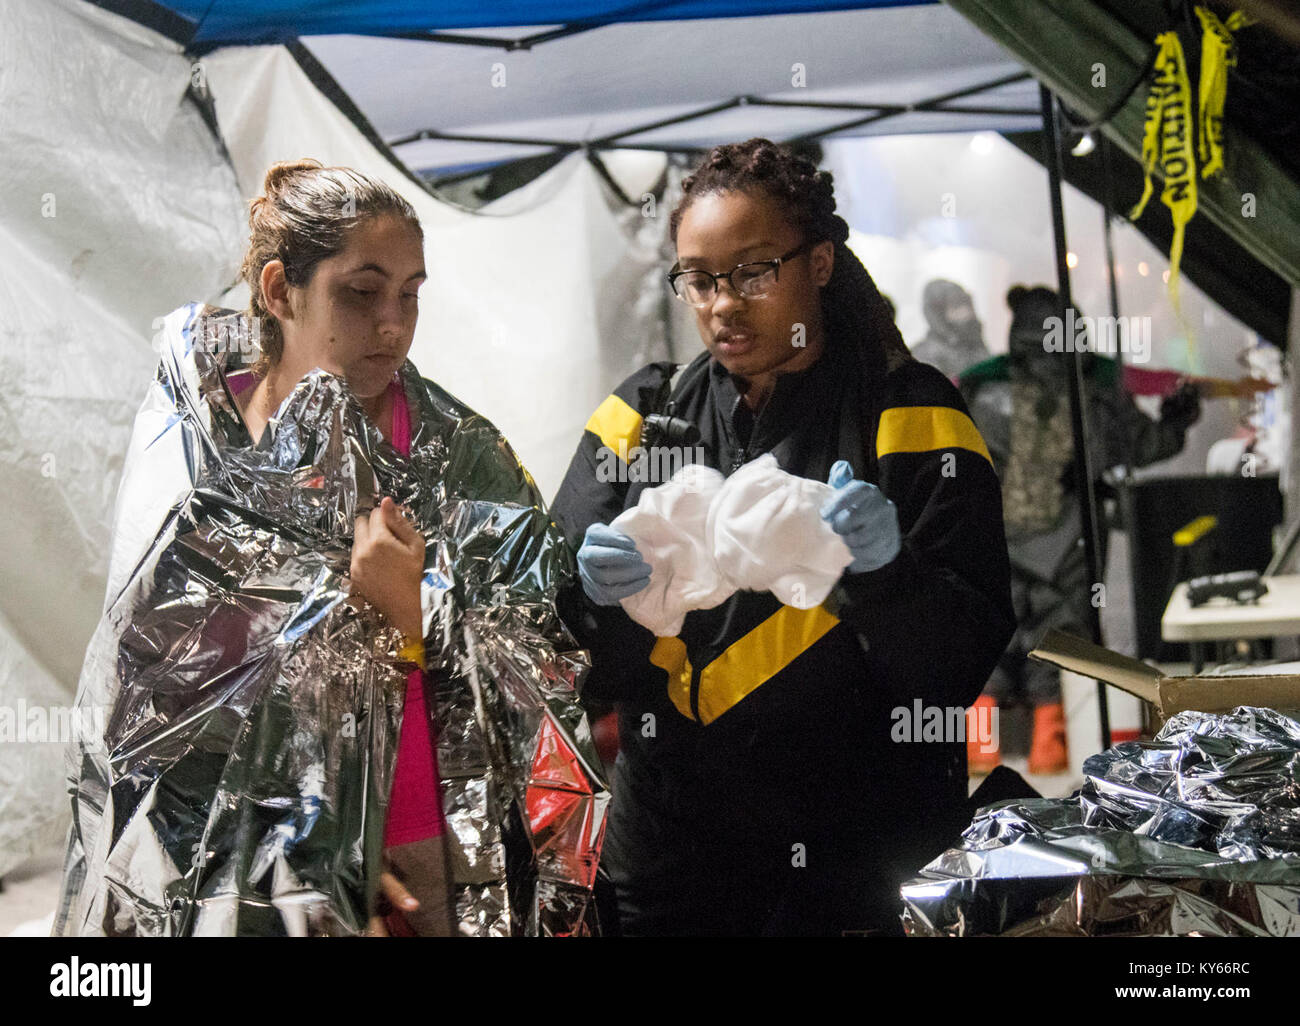 U.S. Army Soldier provides a space blanket to simulated casualties during a Mass Casualty Decontamination exercise at the Homestead-Miami Speedway, in Miami-Dade, Florida, Jan. 9, 2018. This is the 3rd in a series of joint training exercises between Active Duty, Guard, and Reserve Army units and local municipalities across the United States. This JTE focused on the decontamination and transportation of casualties in a simulated mass chemical attack. (DoD Stock Photo